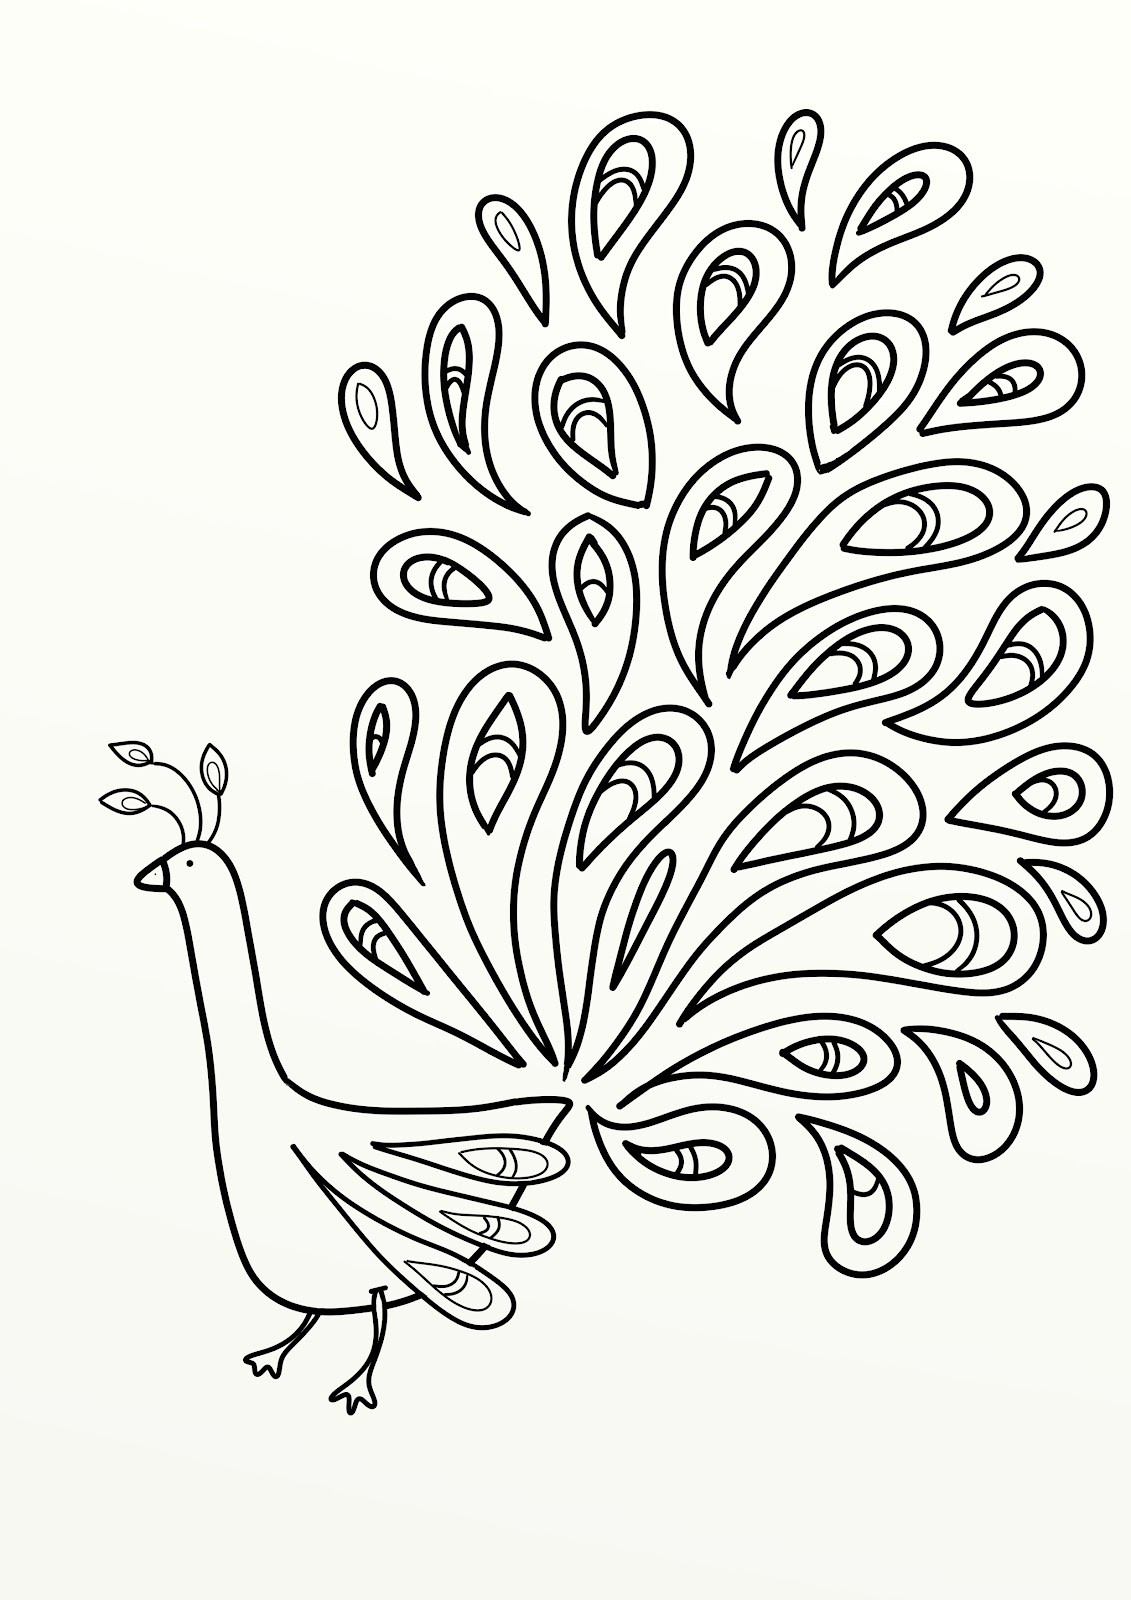 Printable Coloring Pages Of Peacocks
 Peacock Coloring Pages